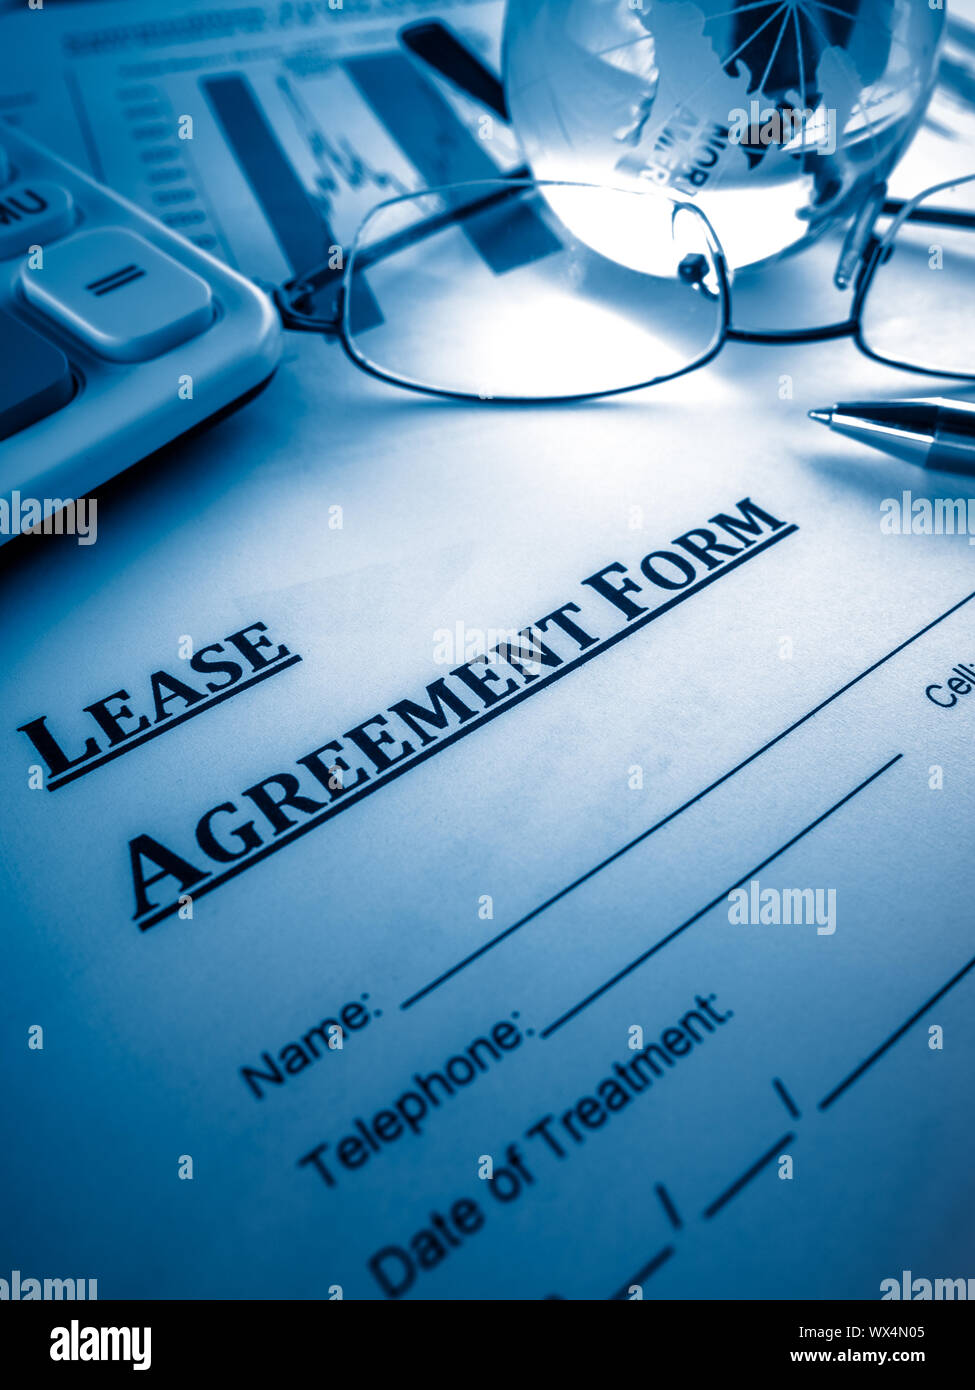 lease agreement form on the desk. Stock Photo